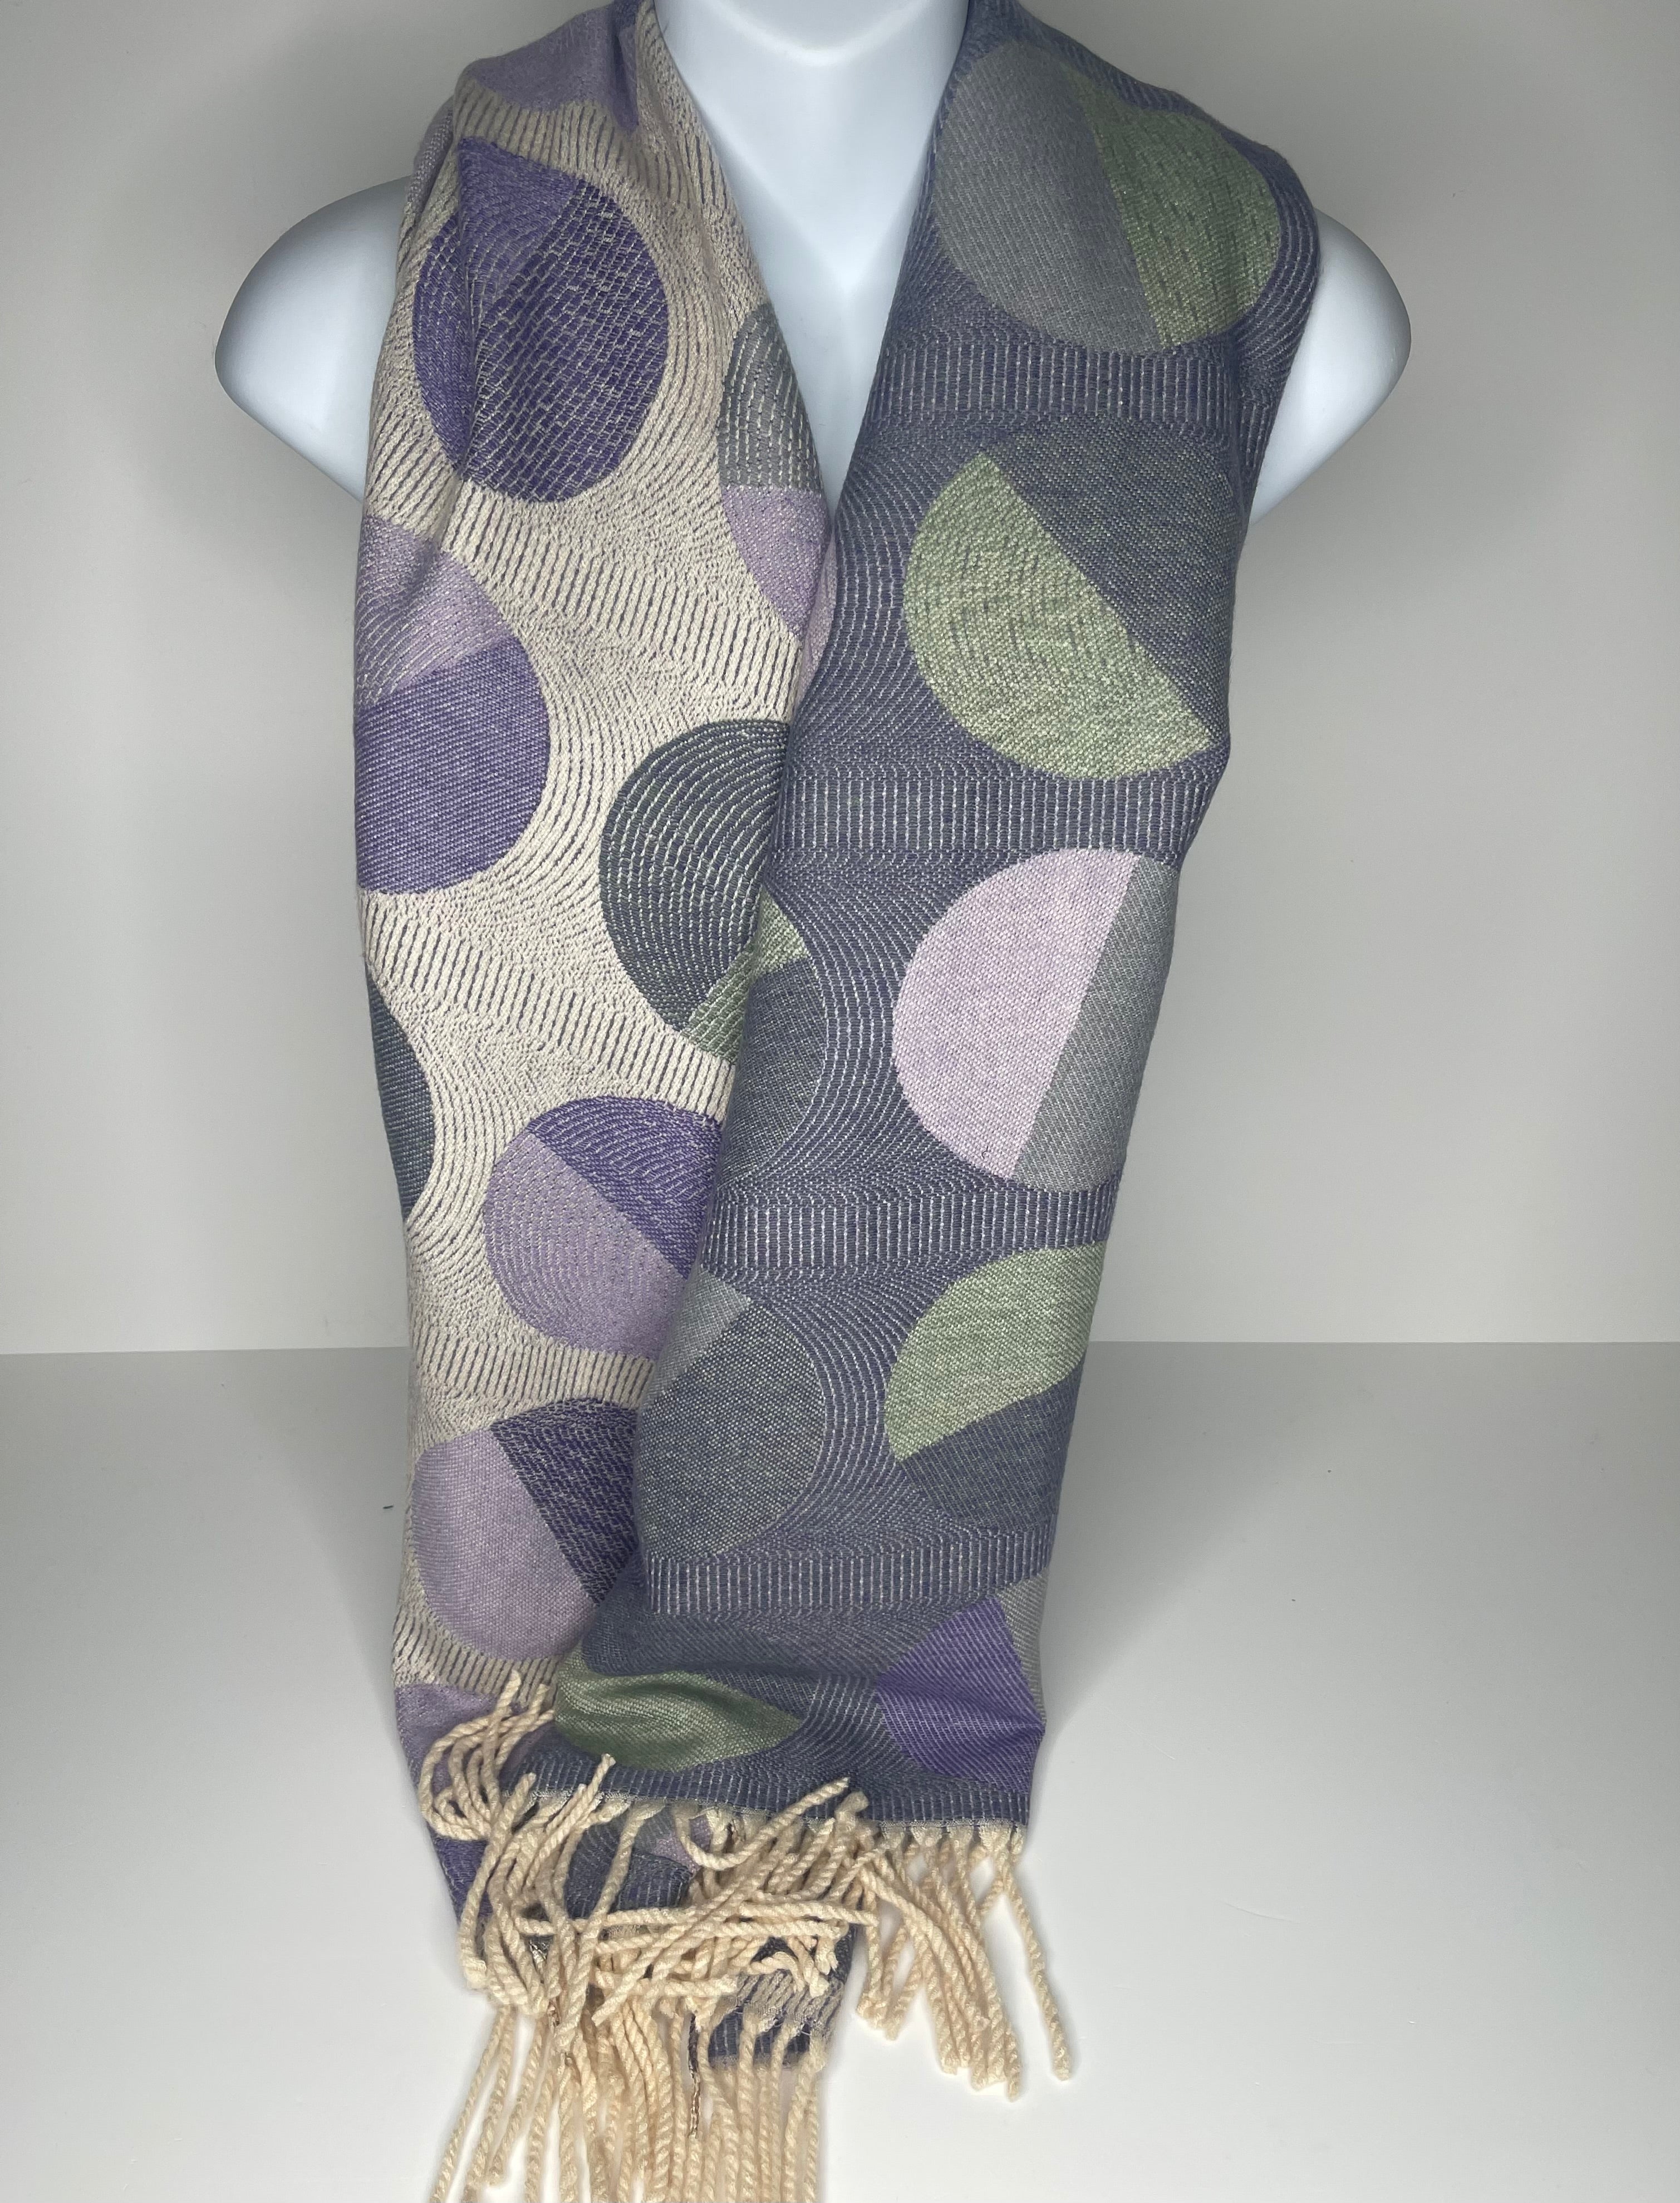 Winter weight, wool-mix, 'marble' print scarf in shades of mauve, winter white, grey and sage green